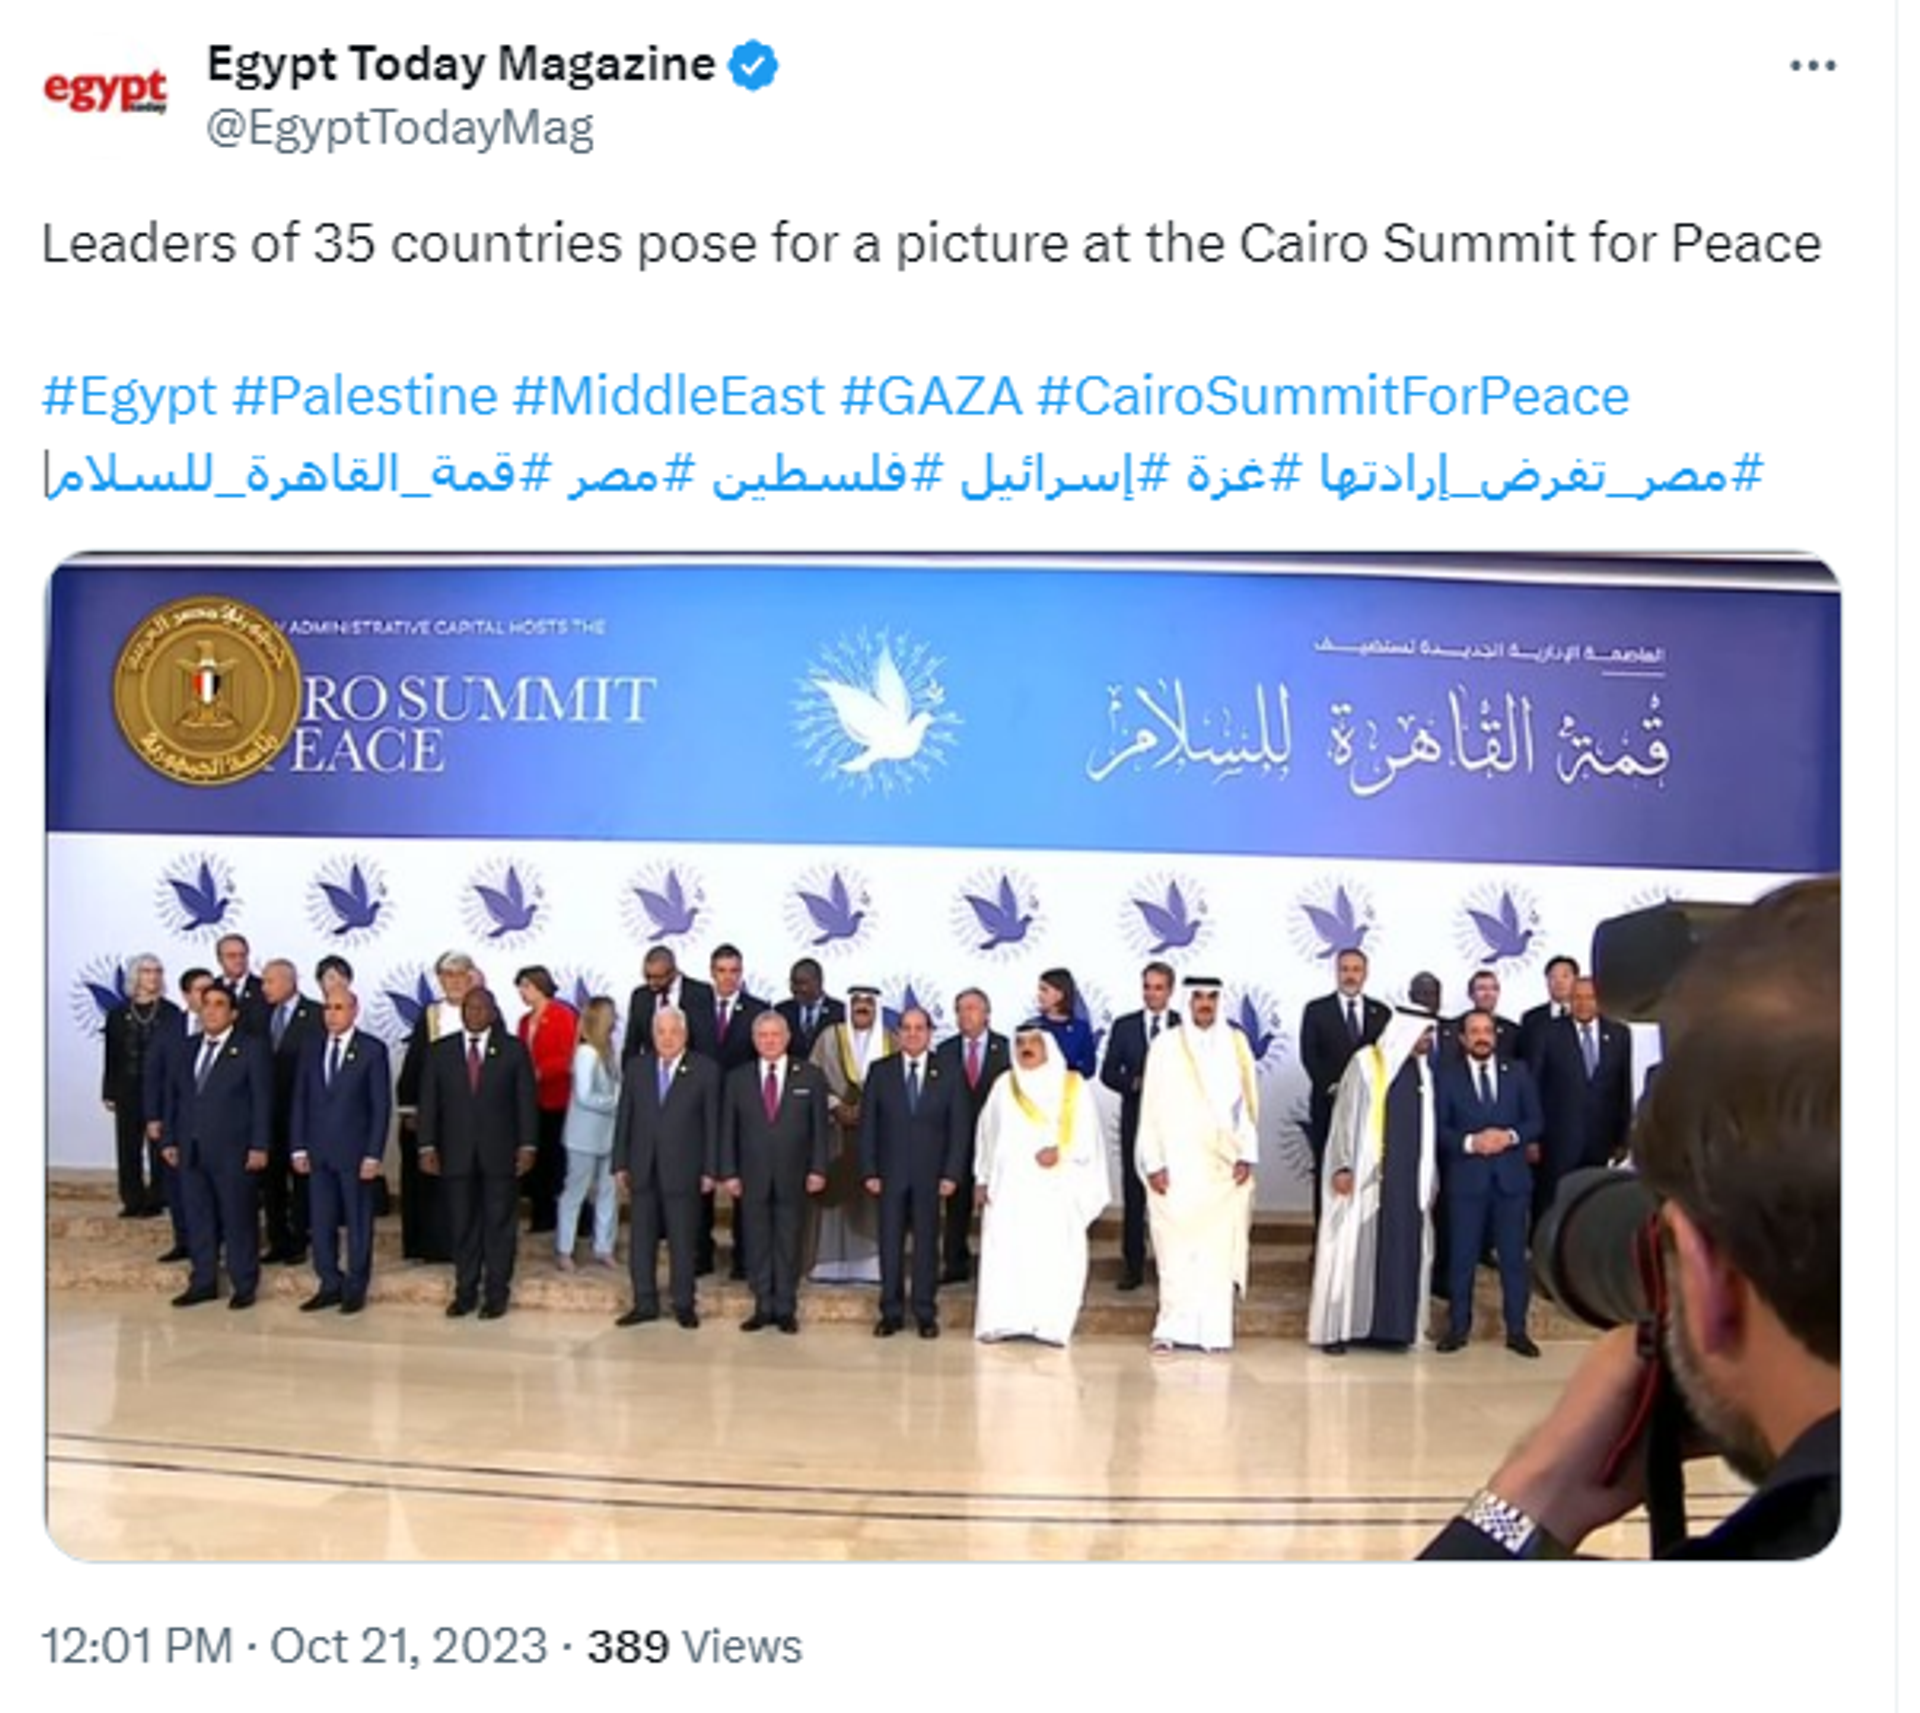 Screengrab featuring footage from Cairo Peace Summit on Saturday, October 21, 2023. - Sputnik International, 1920, 21.10.2023